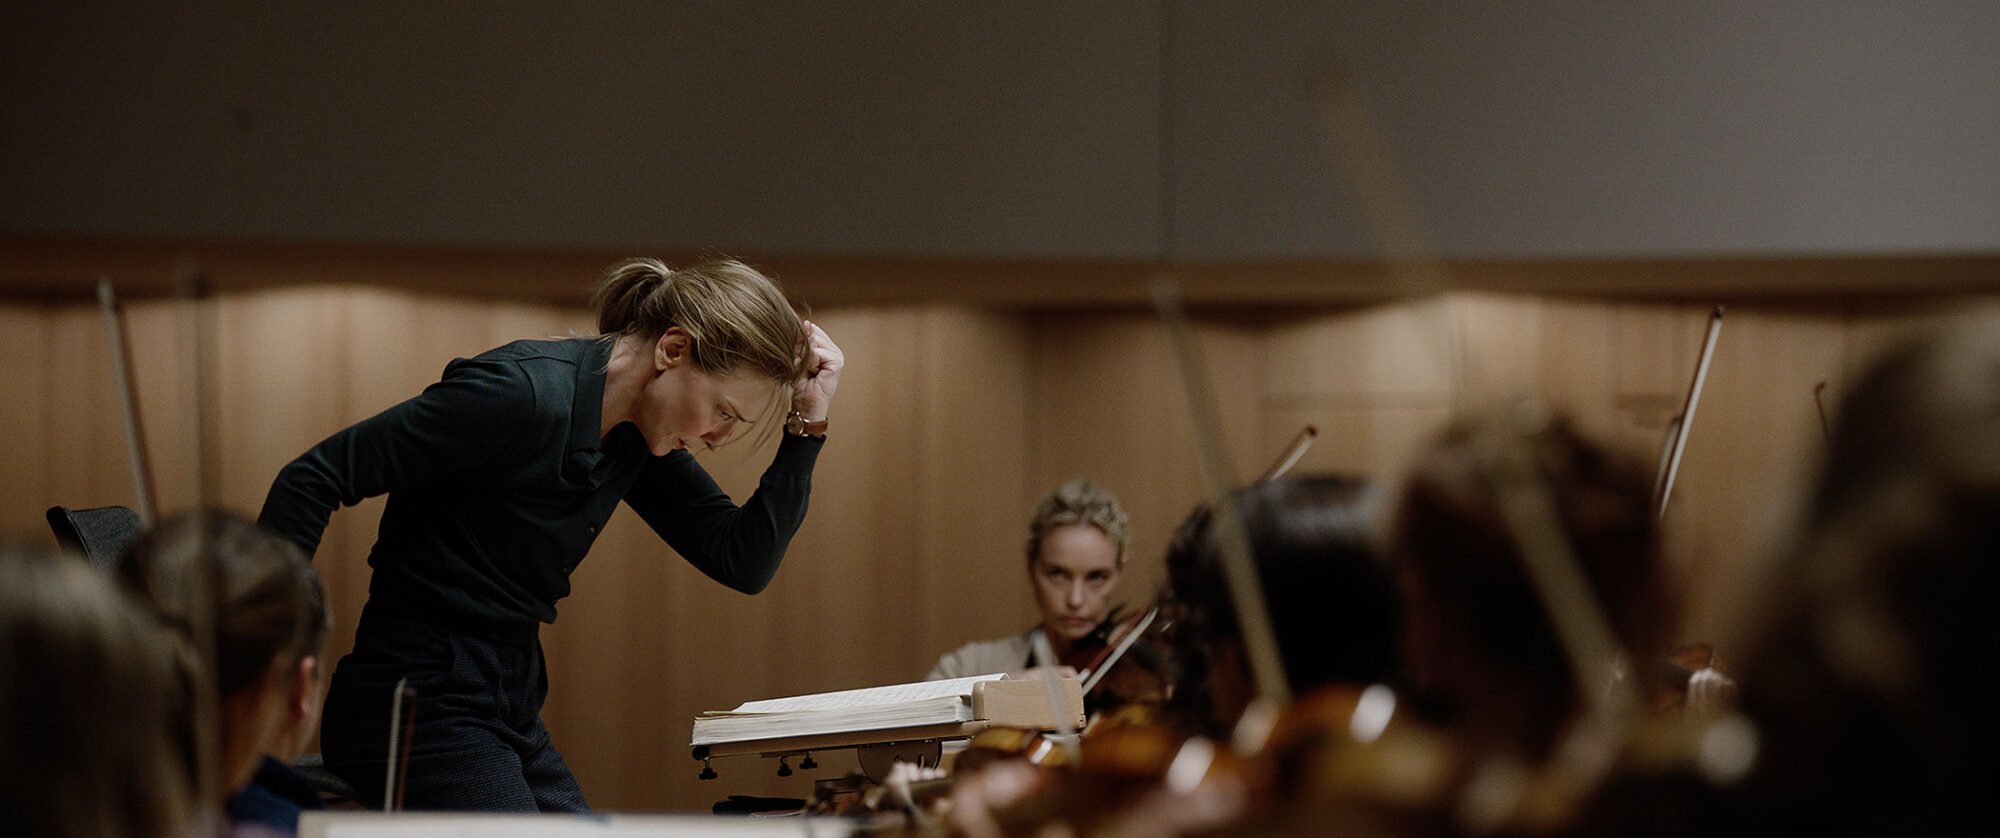 Still from TÁR (2022): Tár rehearses Edward Elgar's Cello Concerto with newly admitted orchestra cellist Olga Metkina